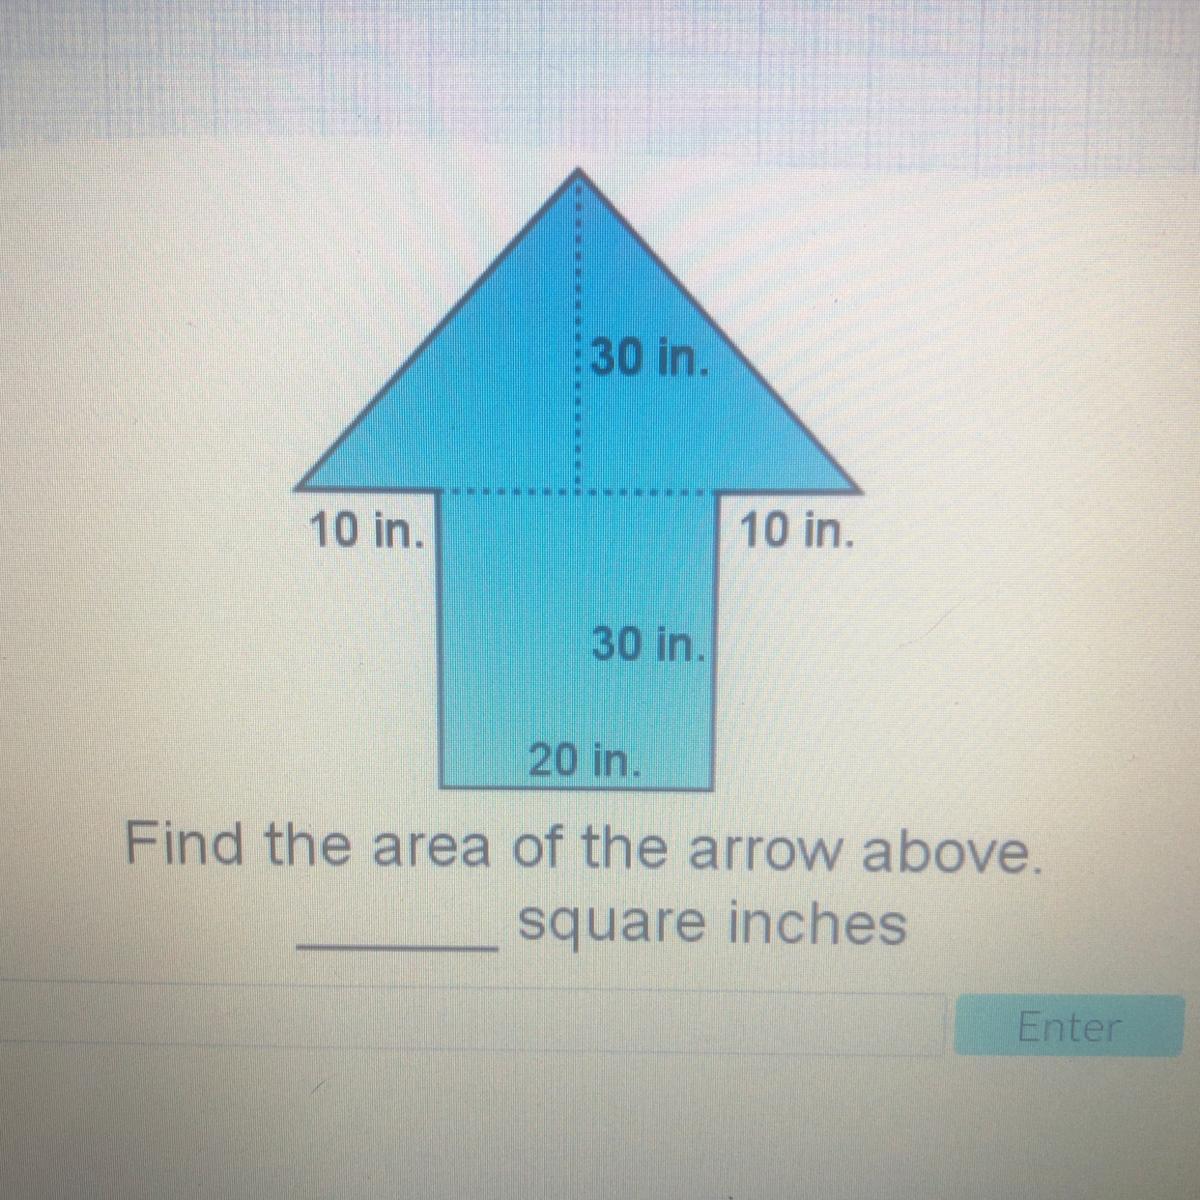 30 In.10 In.10 In.30 In20 InFind The Area Of The Arrow Above.square Inches